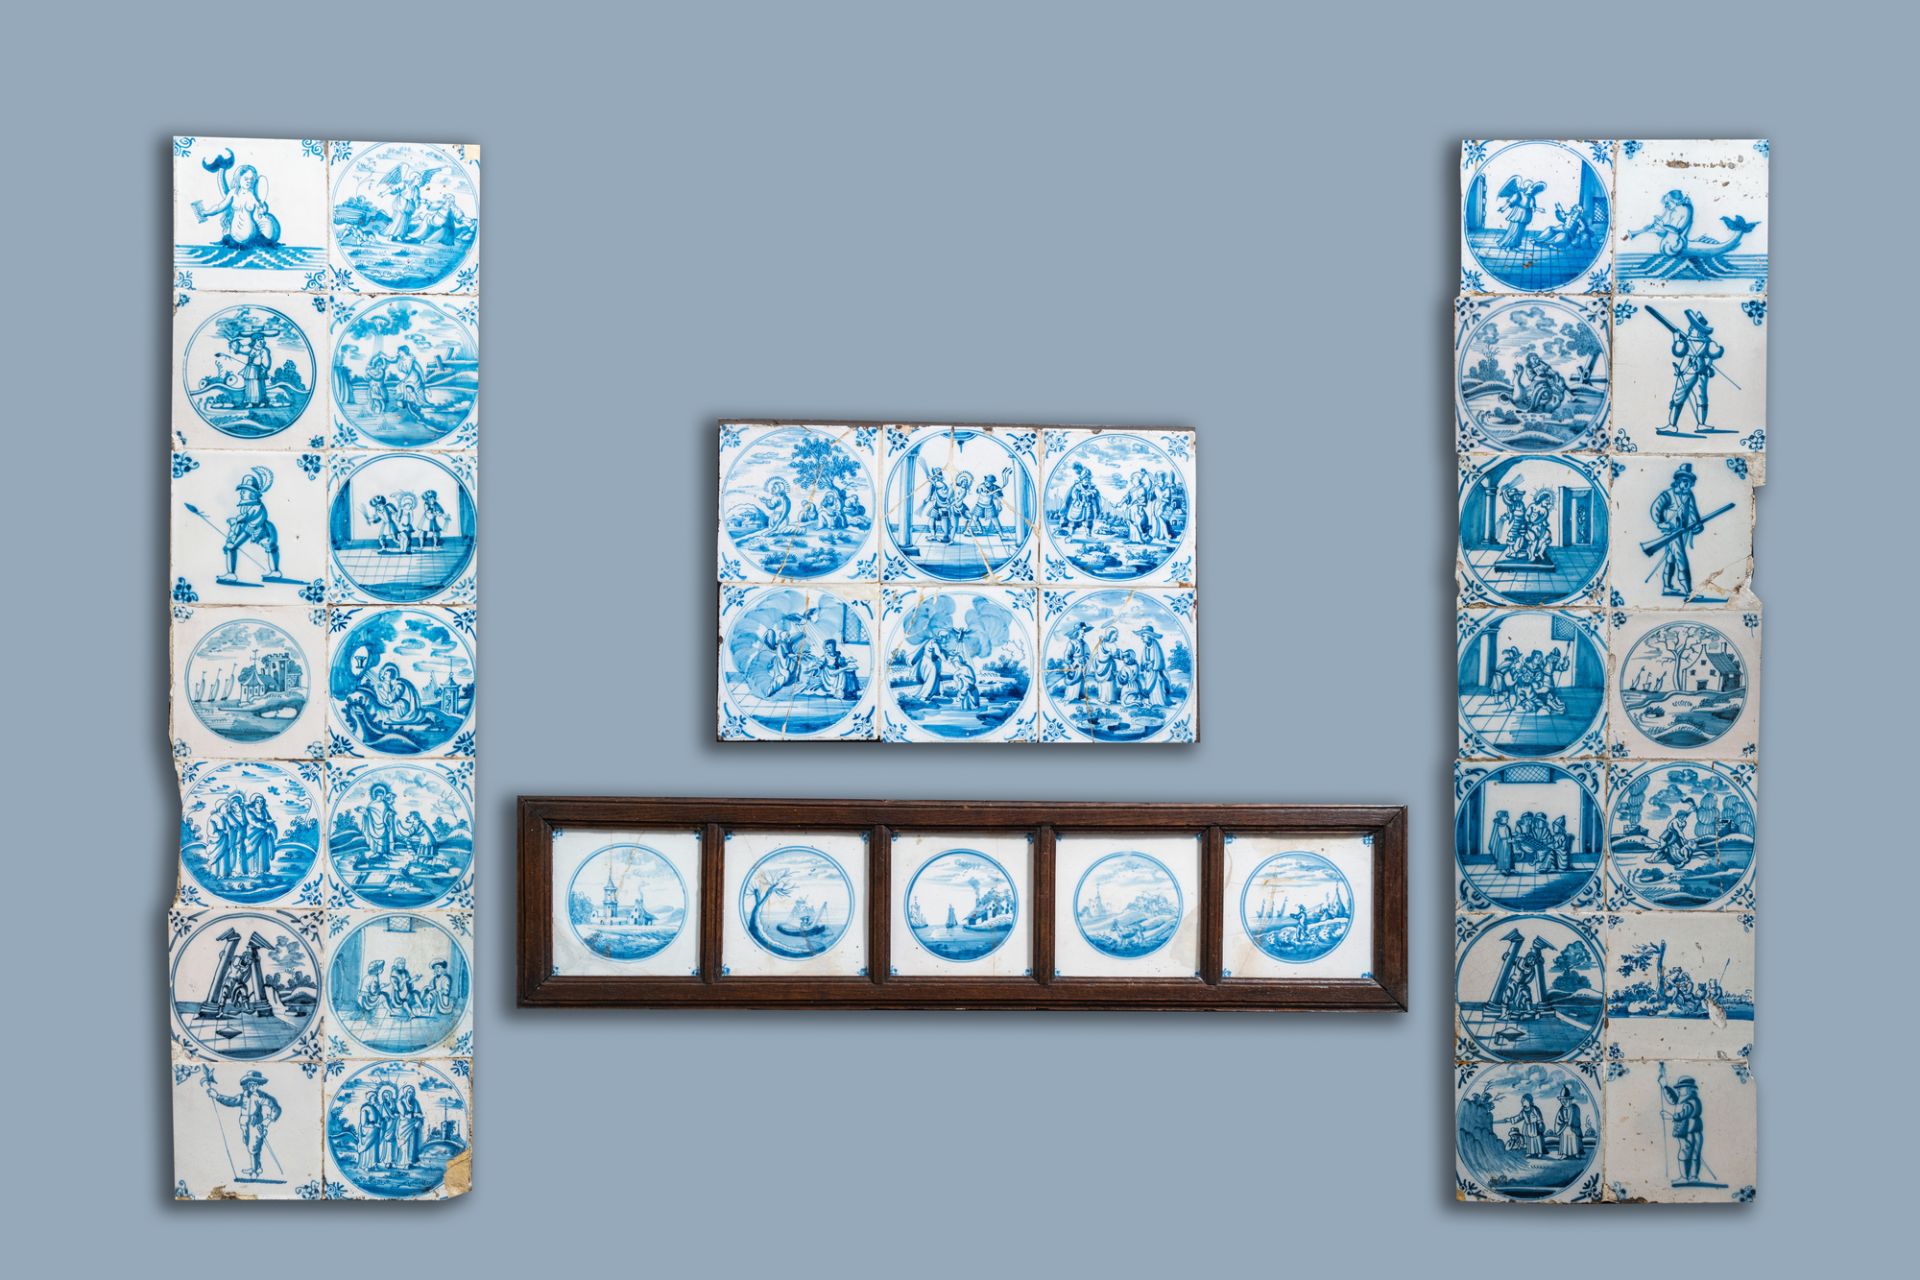 39 various Dutch Delft blue and white tiles, 17th C. and later